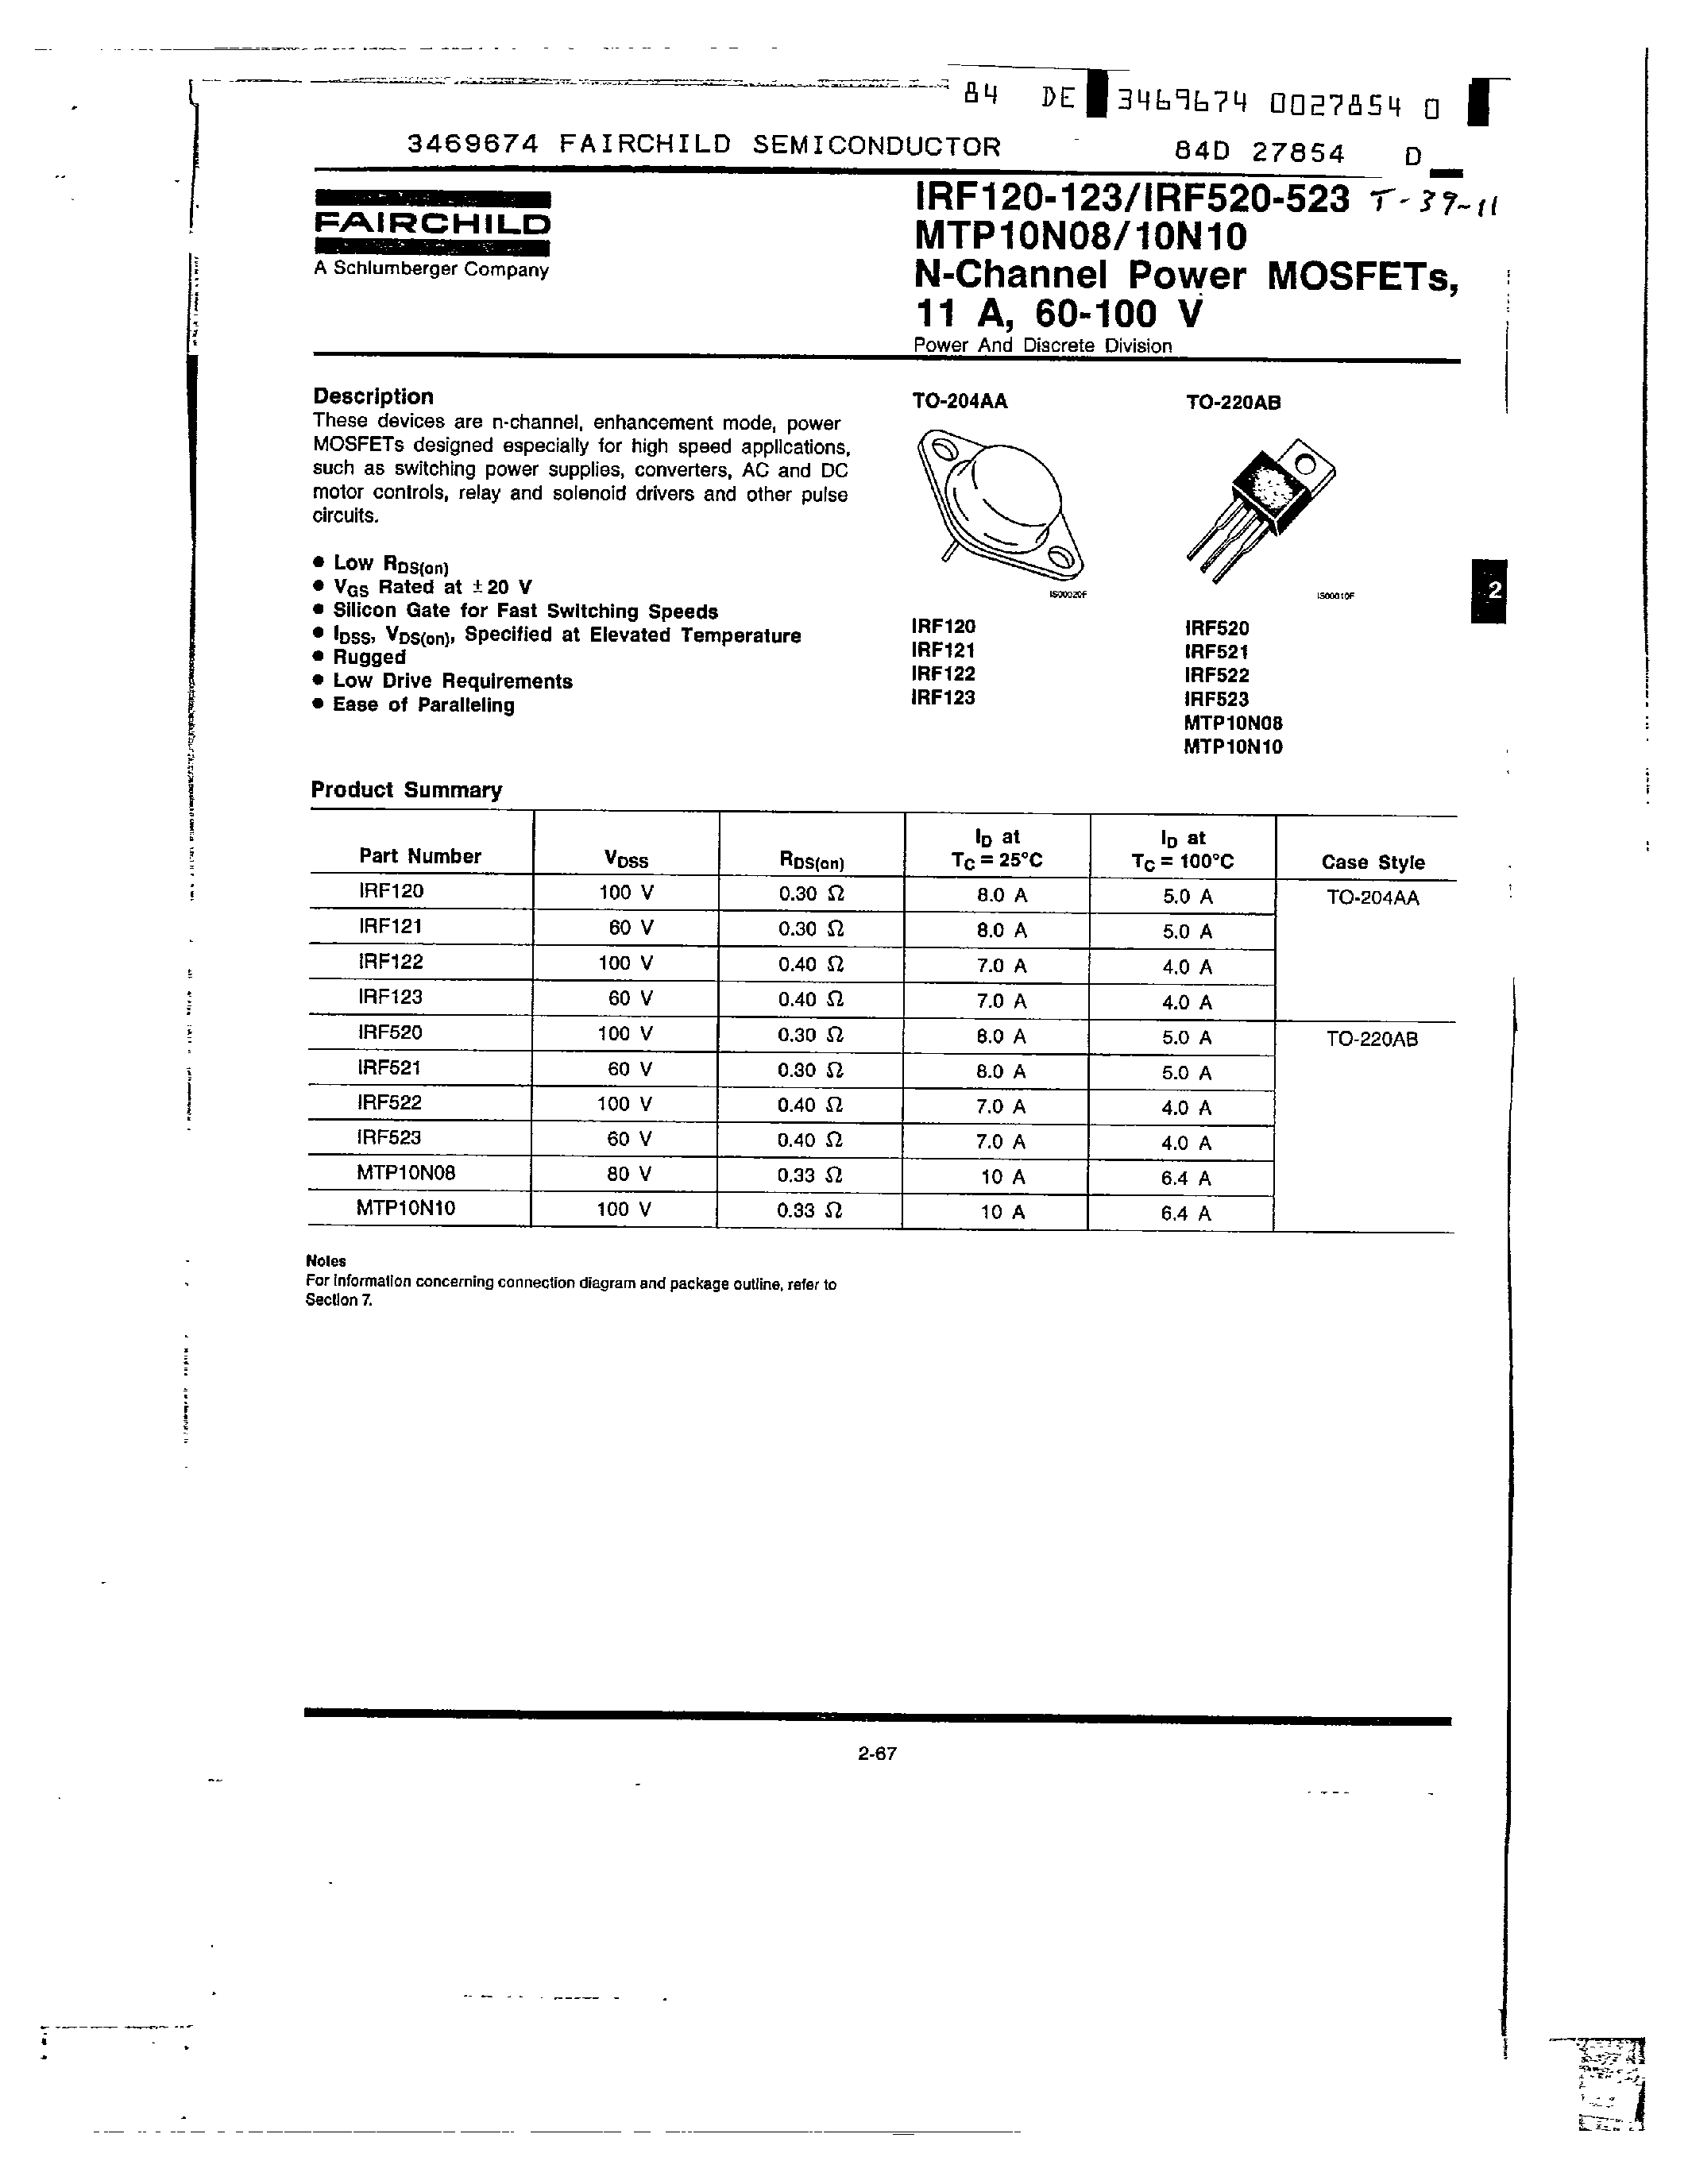 Datasheet IRF120 - N-Channel Power MOSFETs/ 11 A/ 60-100 V page 1